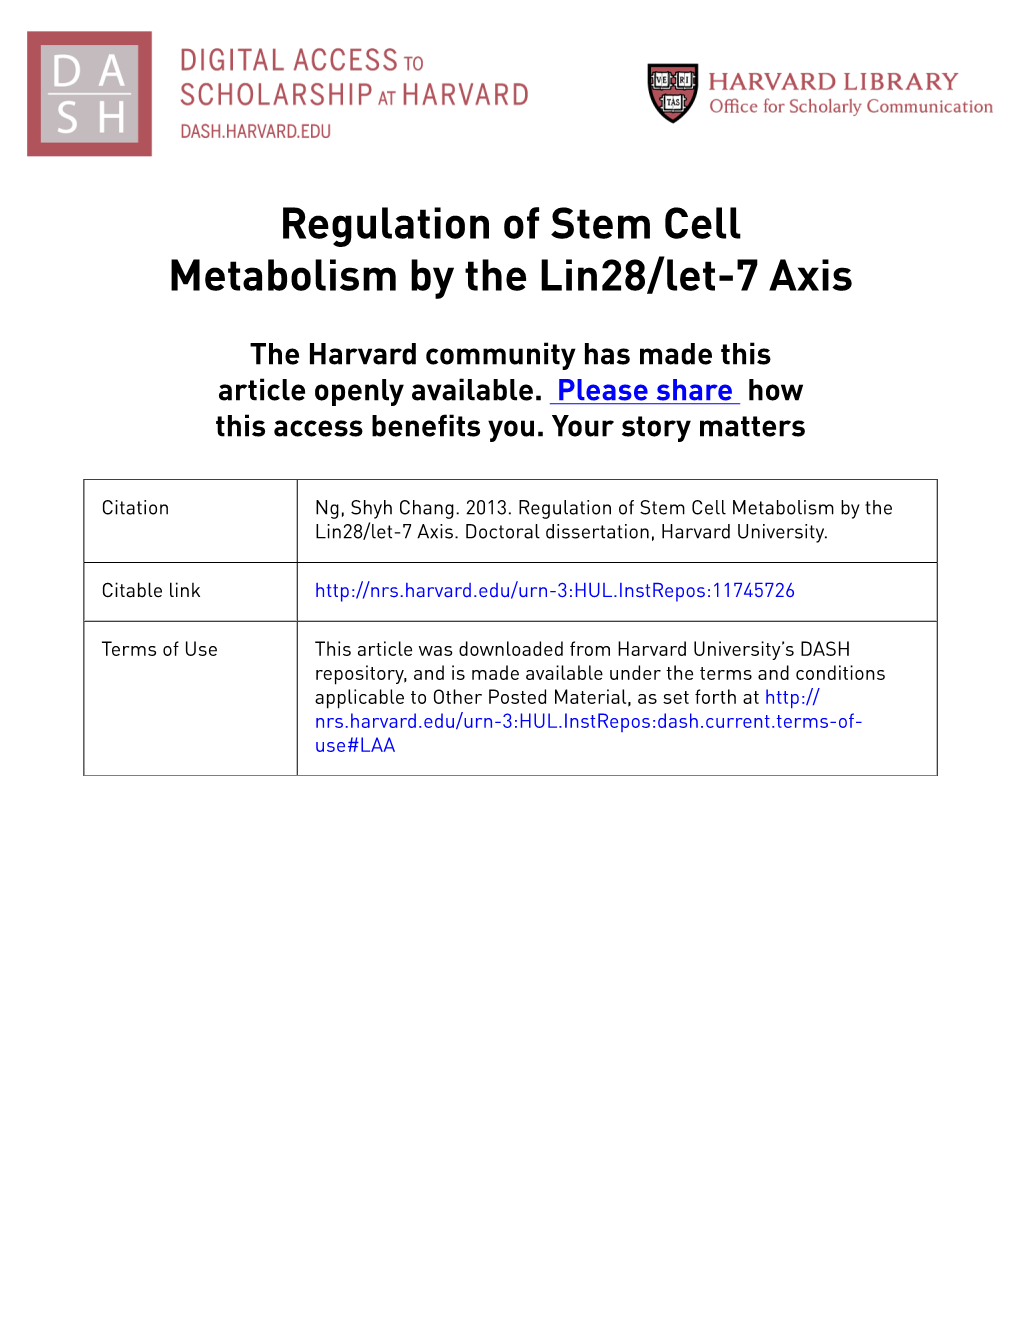 Regulation of Stem Cell Metabolism by the Lin28/Let-7 Axis